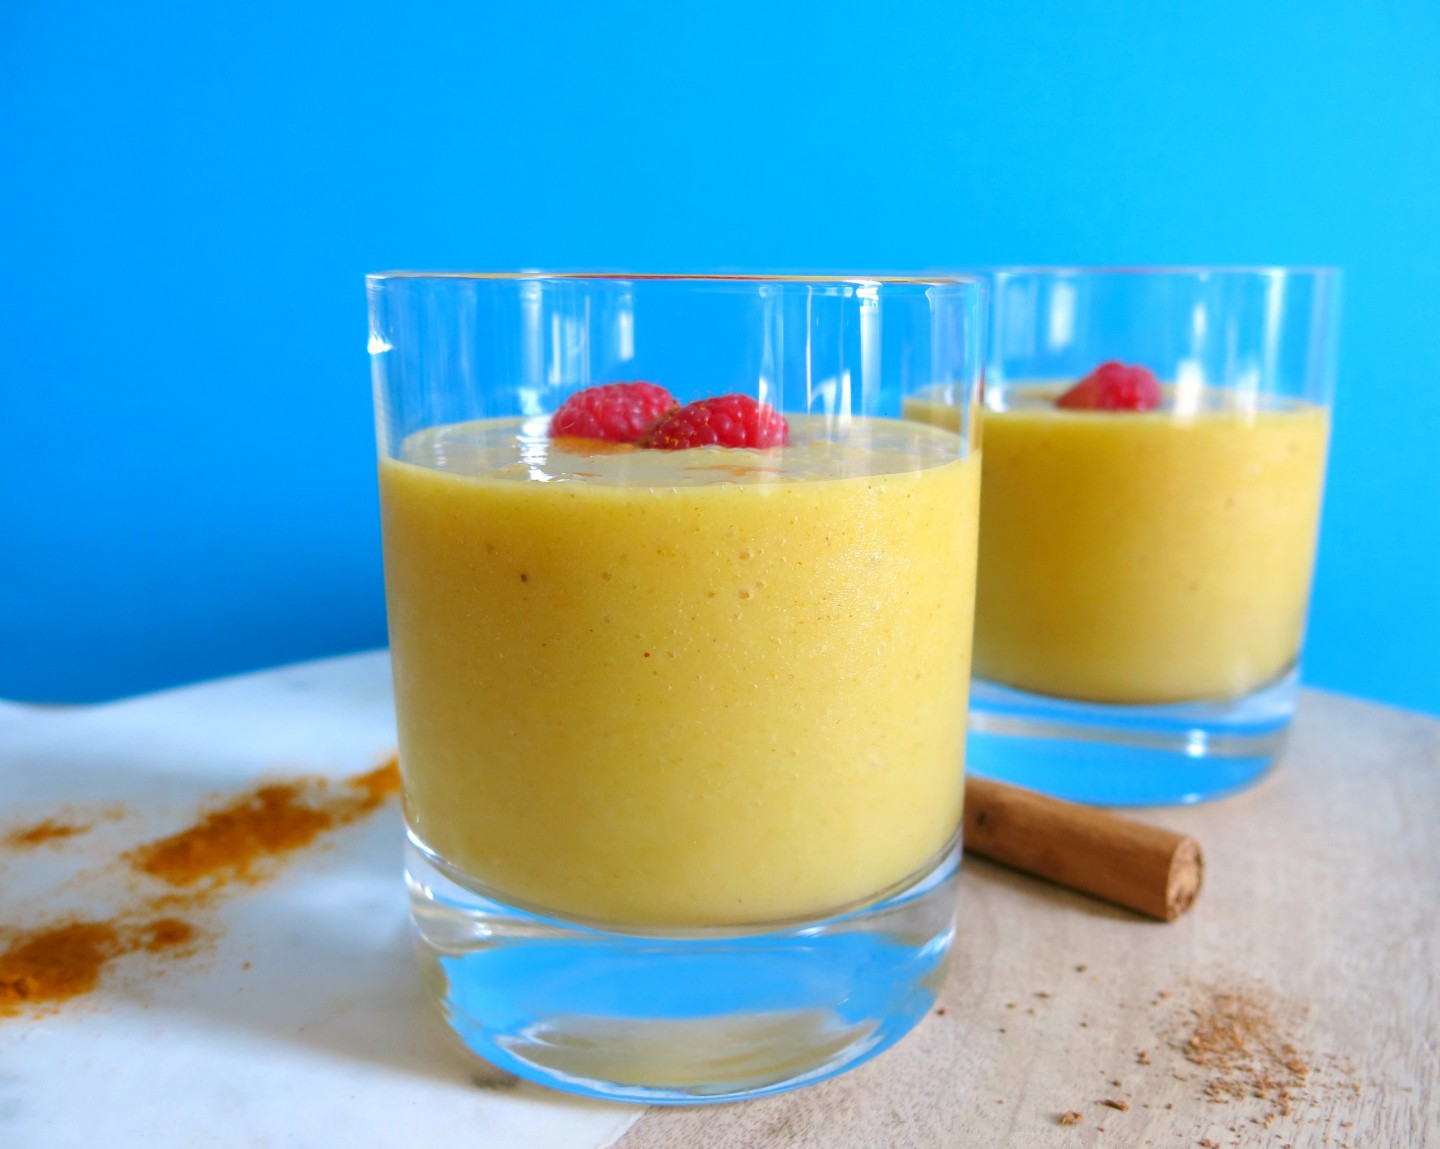 Quick and easy Mango, Banana, Turmeric and Oat Milk Smoothie Recipe.